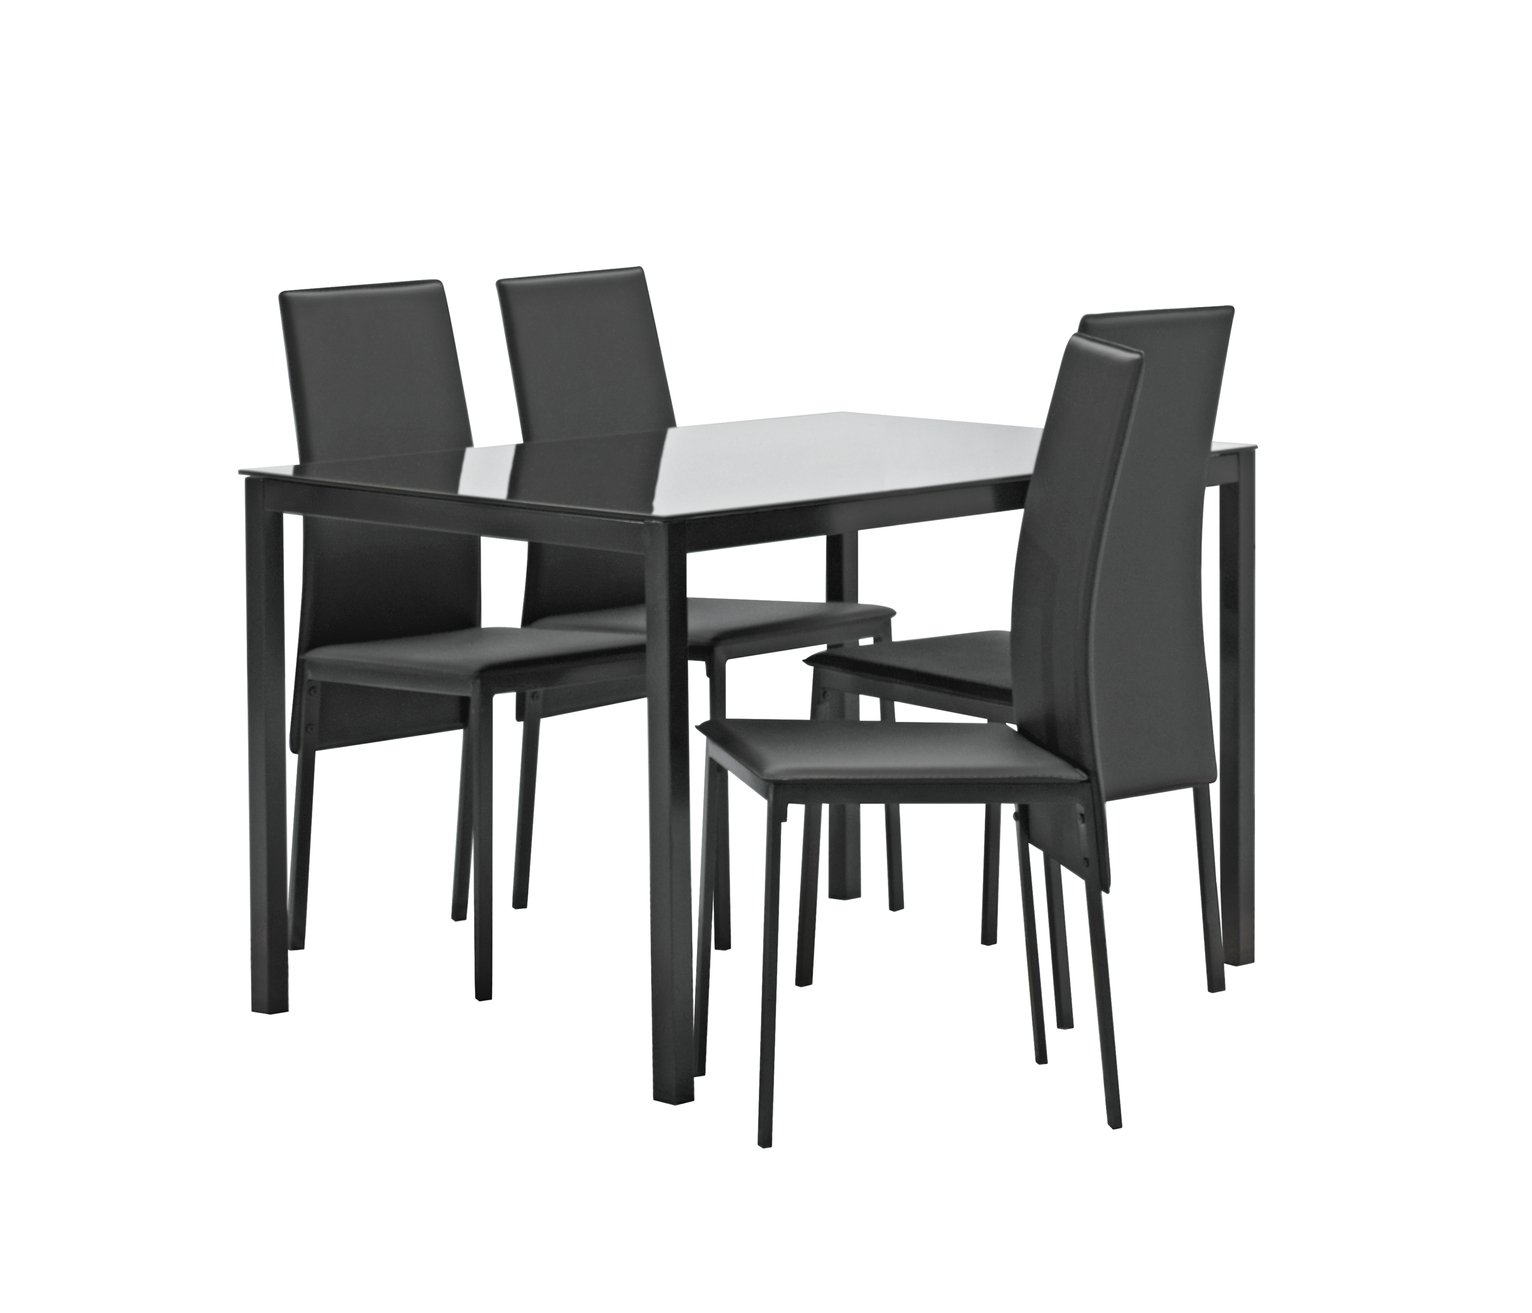 Argos Home Lido Glass Dining Table & 4 Chairs - Black (5037968) | Argos